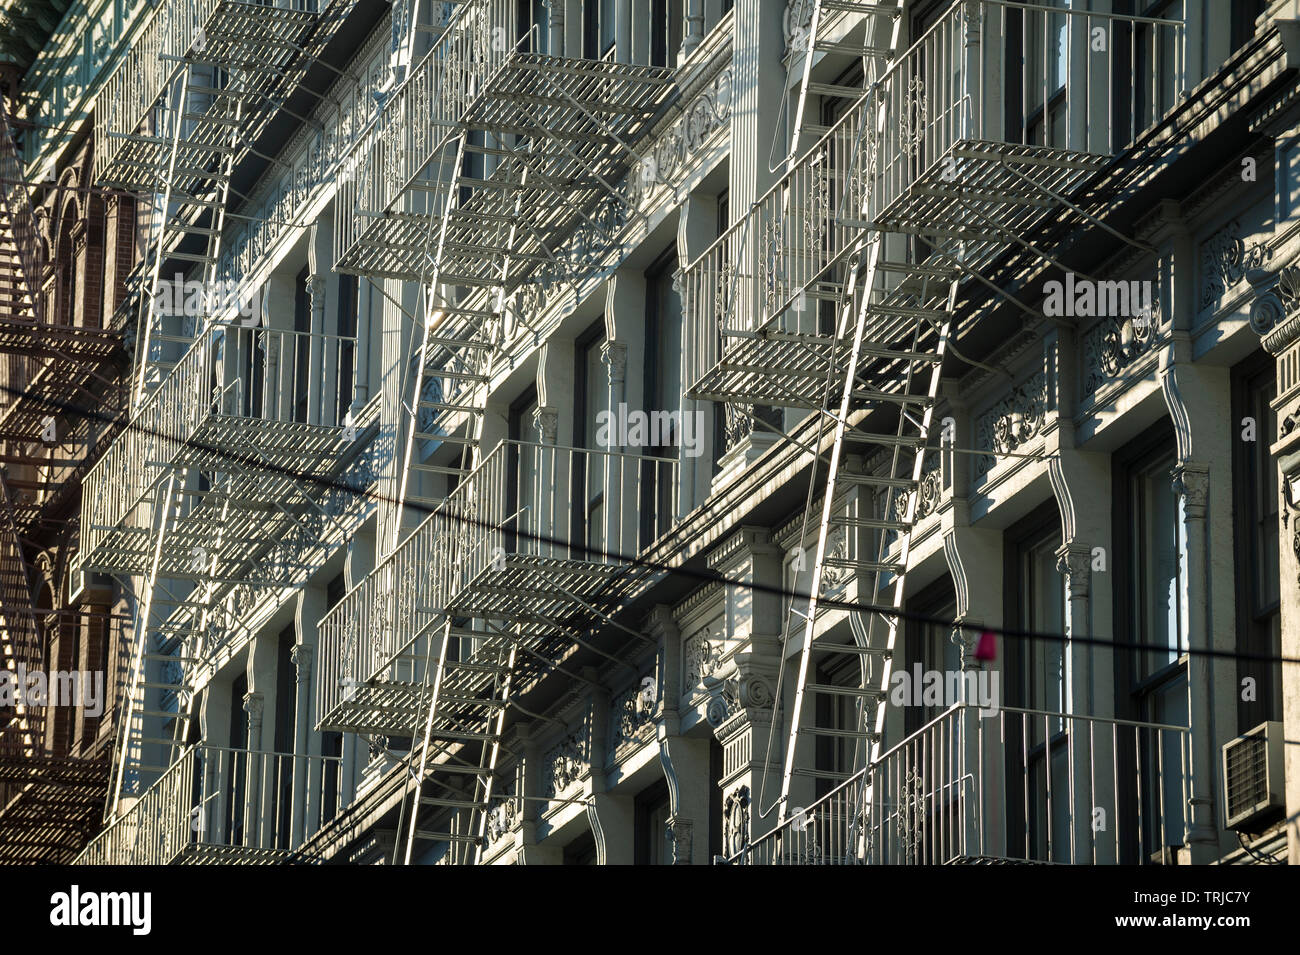 Traditional downtown New York City architecture featuring industrial facades lined with metal fire escapes in the SoHo-Cast Iron Historic District Stock Photo